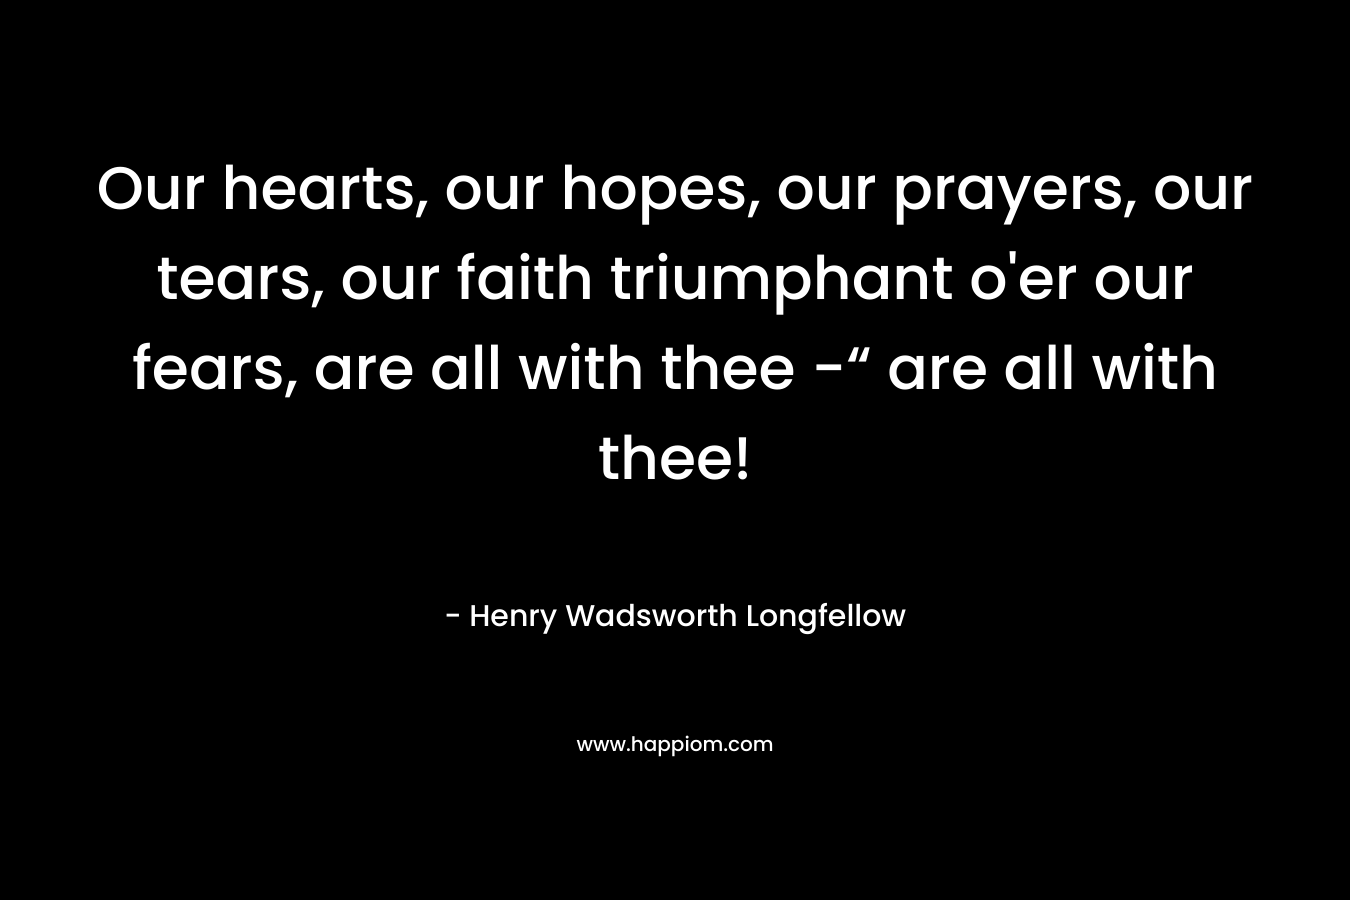 Our hearts, our hopes, our prayers, our tears, our faith triumphant o’er our fears, are all with thee -“ are all with thee! – Henry Wadsworth Longfellow